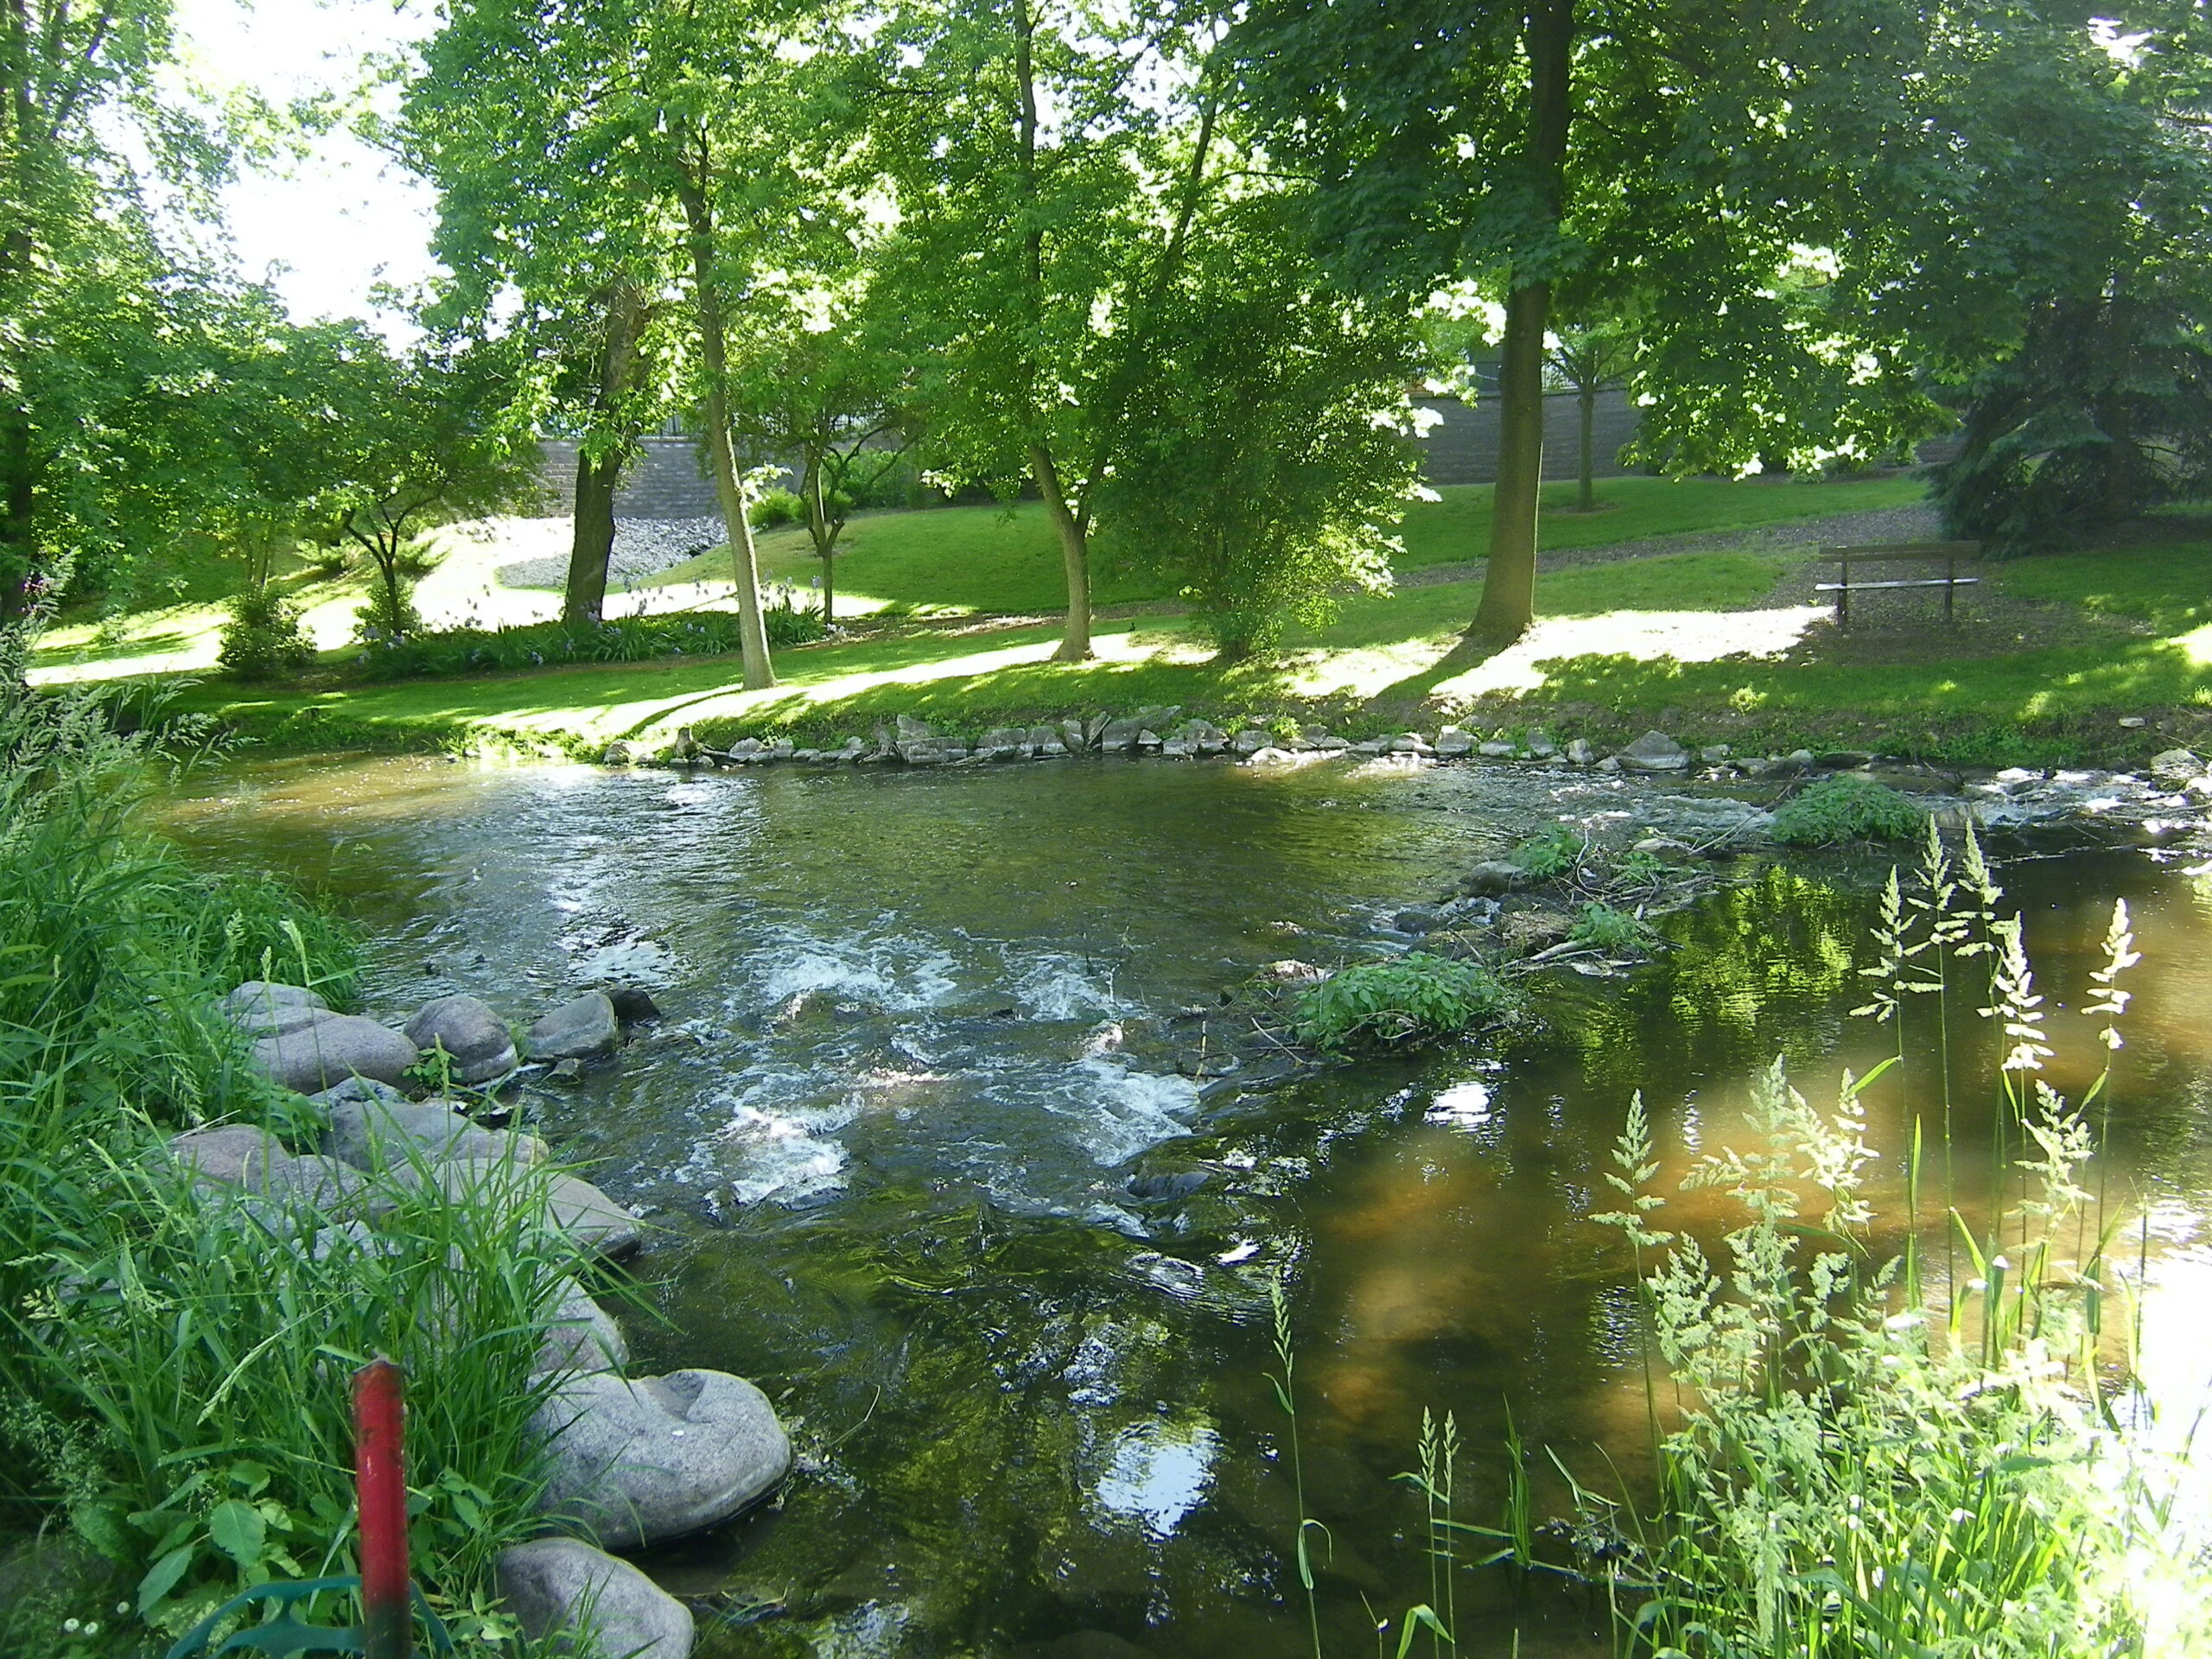 A scenic view of the Bark River along the IAT in Hartland.